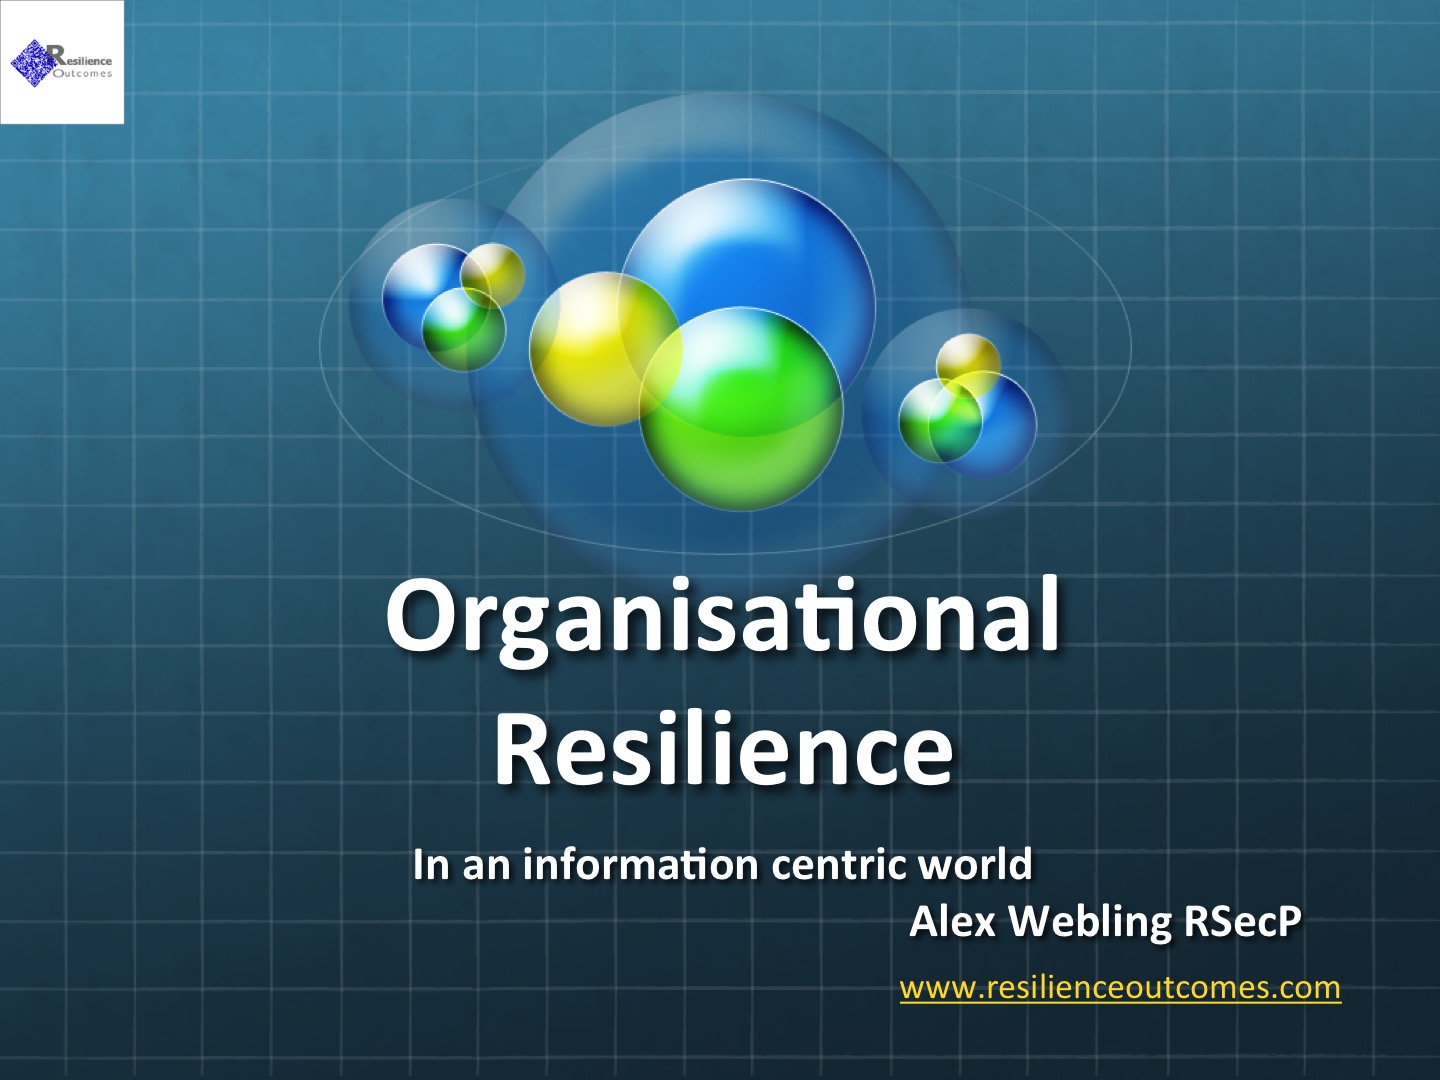 Complexity and Resilience in an Information Centric World